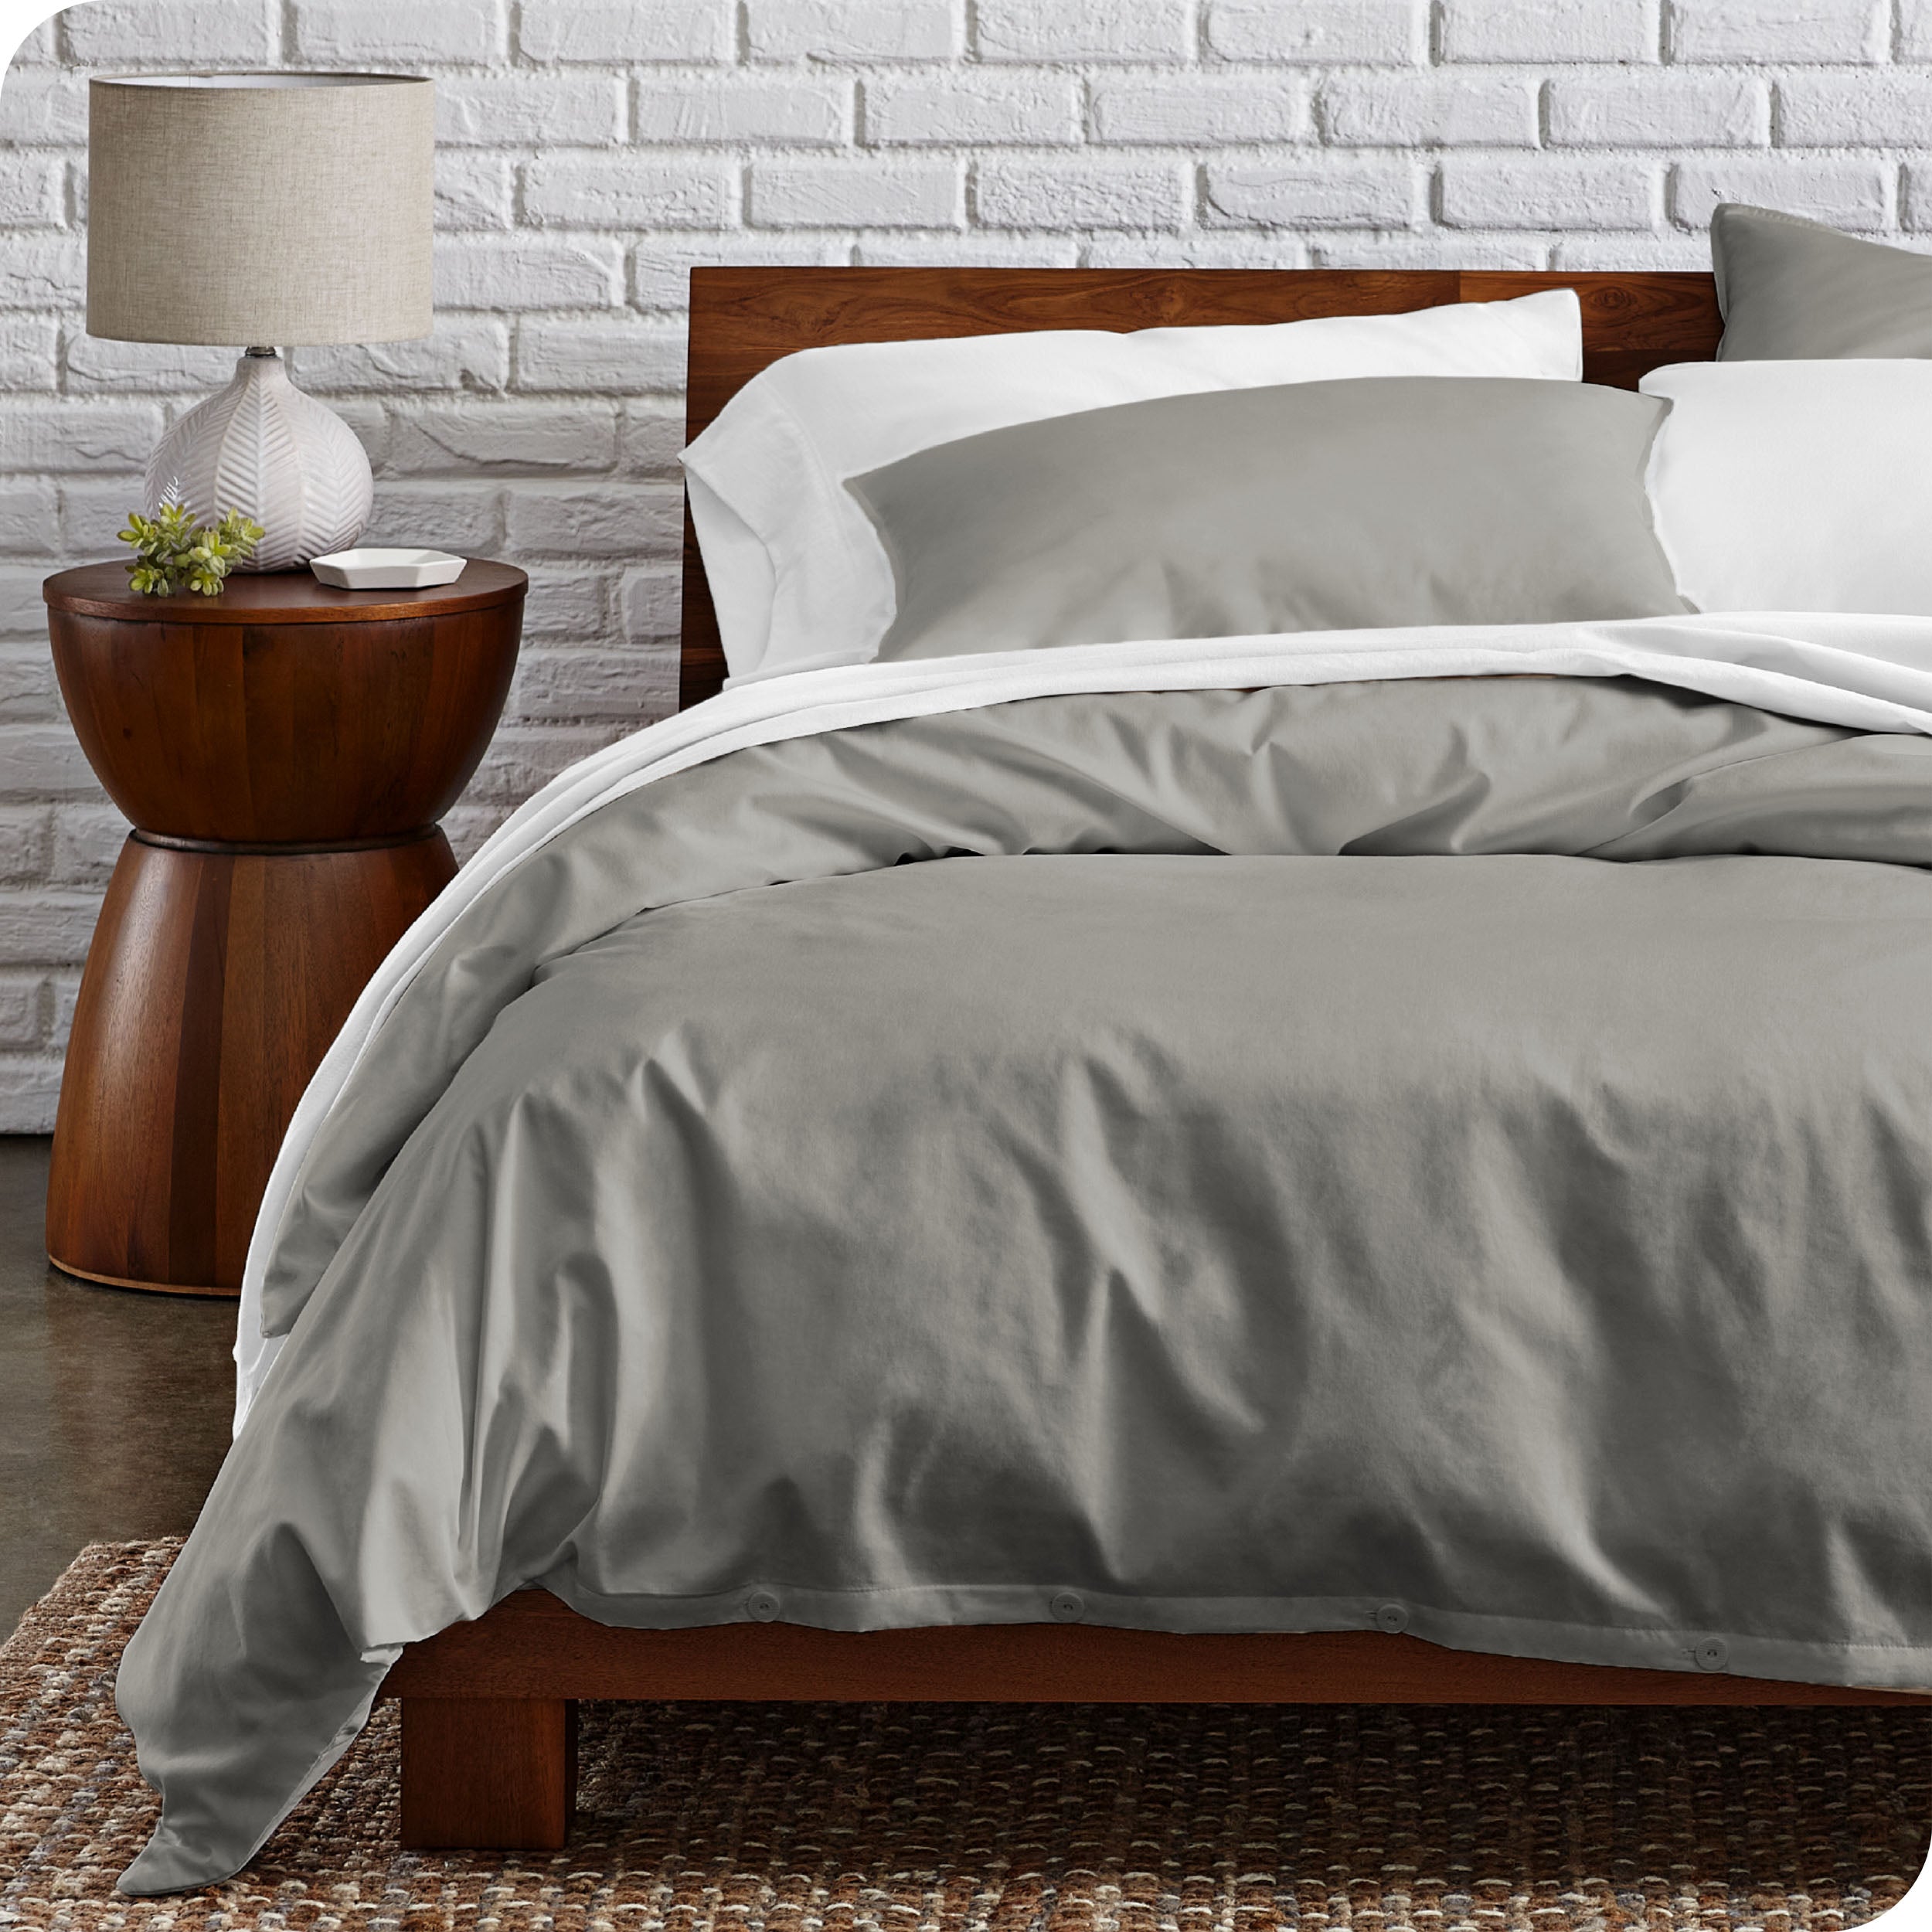 Percale duvet cover set on a bed in a modern bedroom